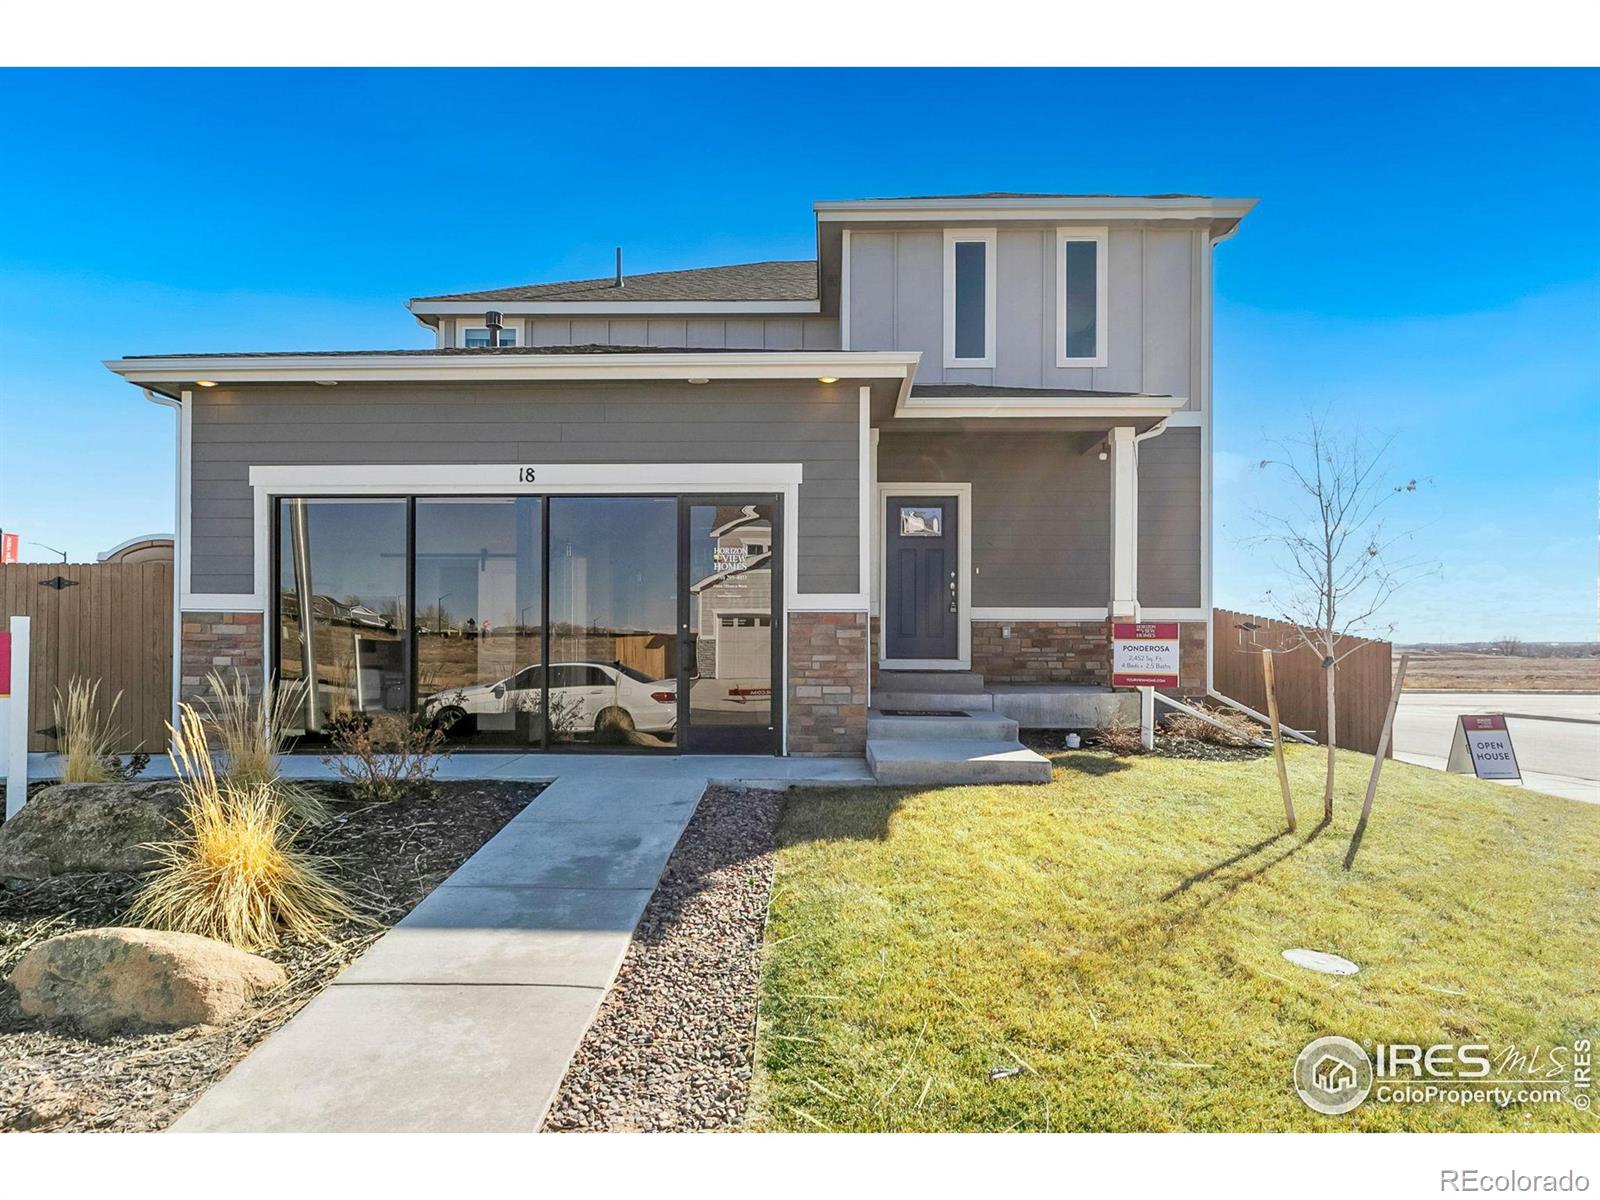 View Lochbuie, CO 80603 house